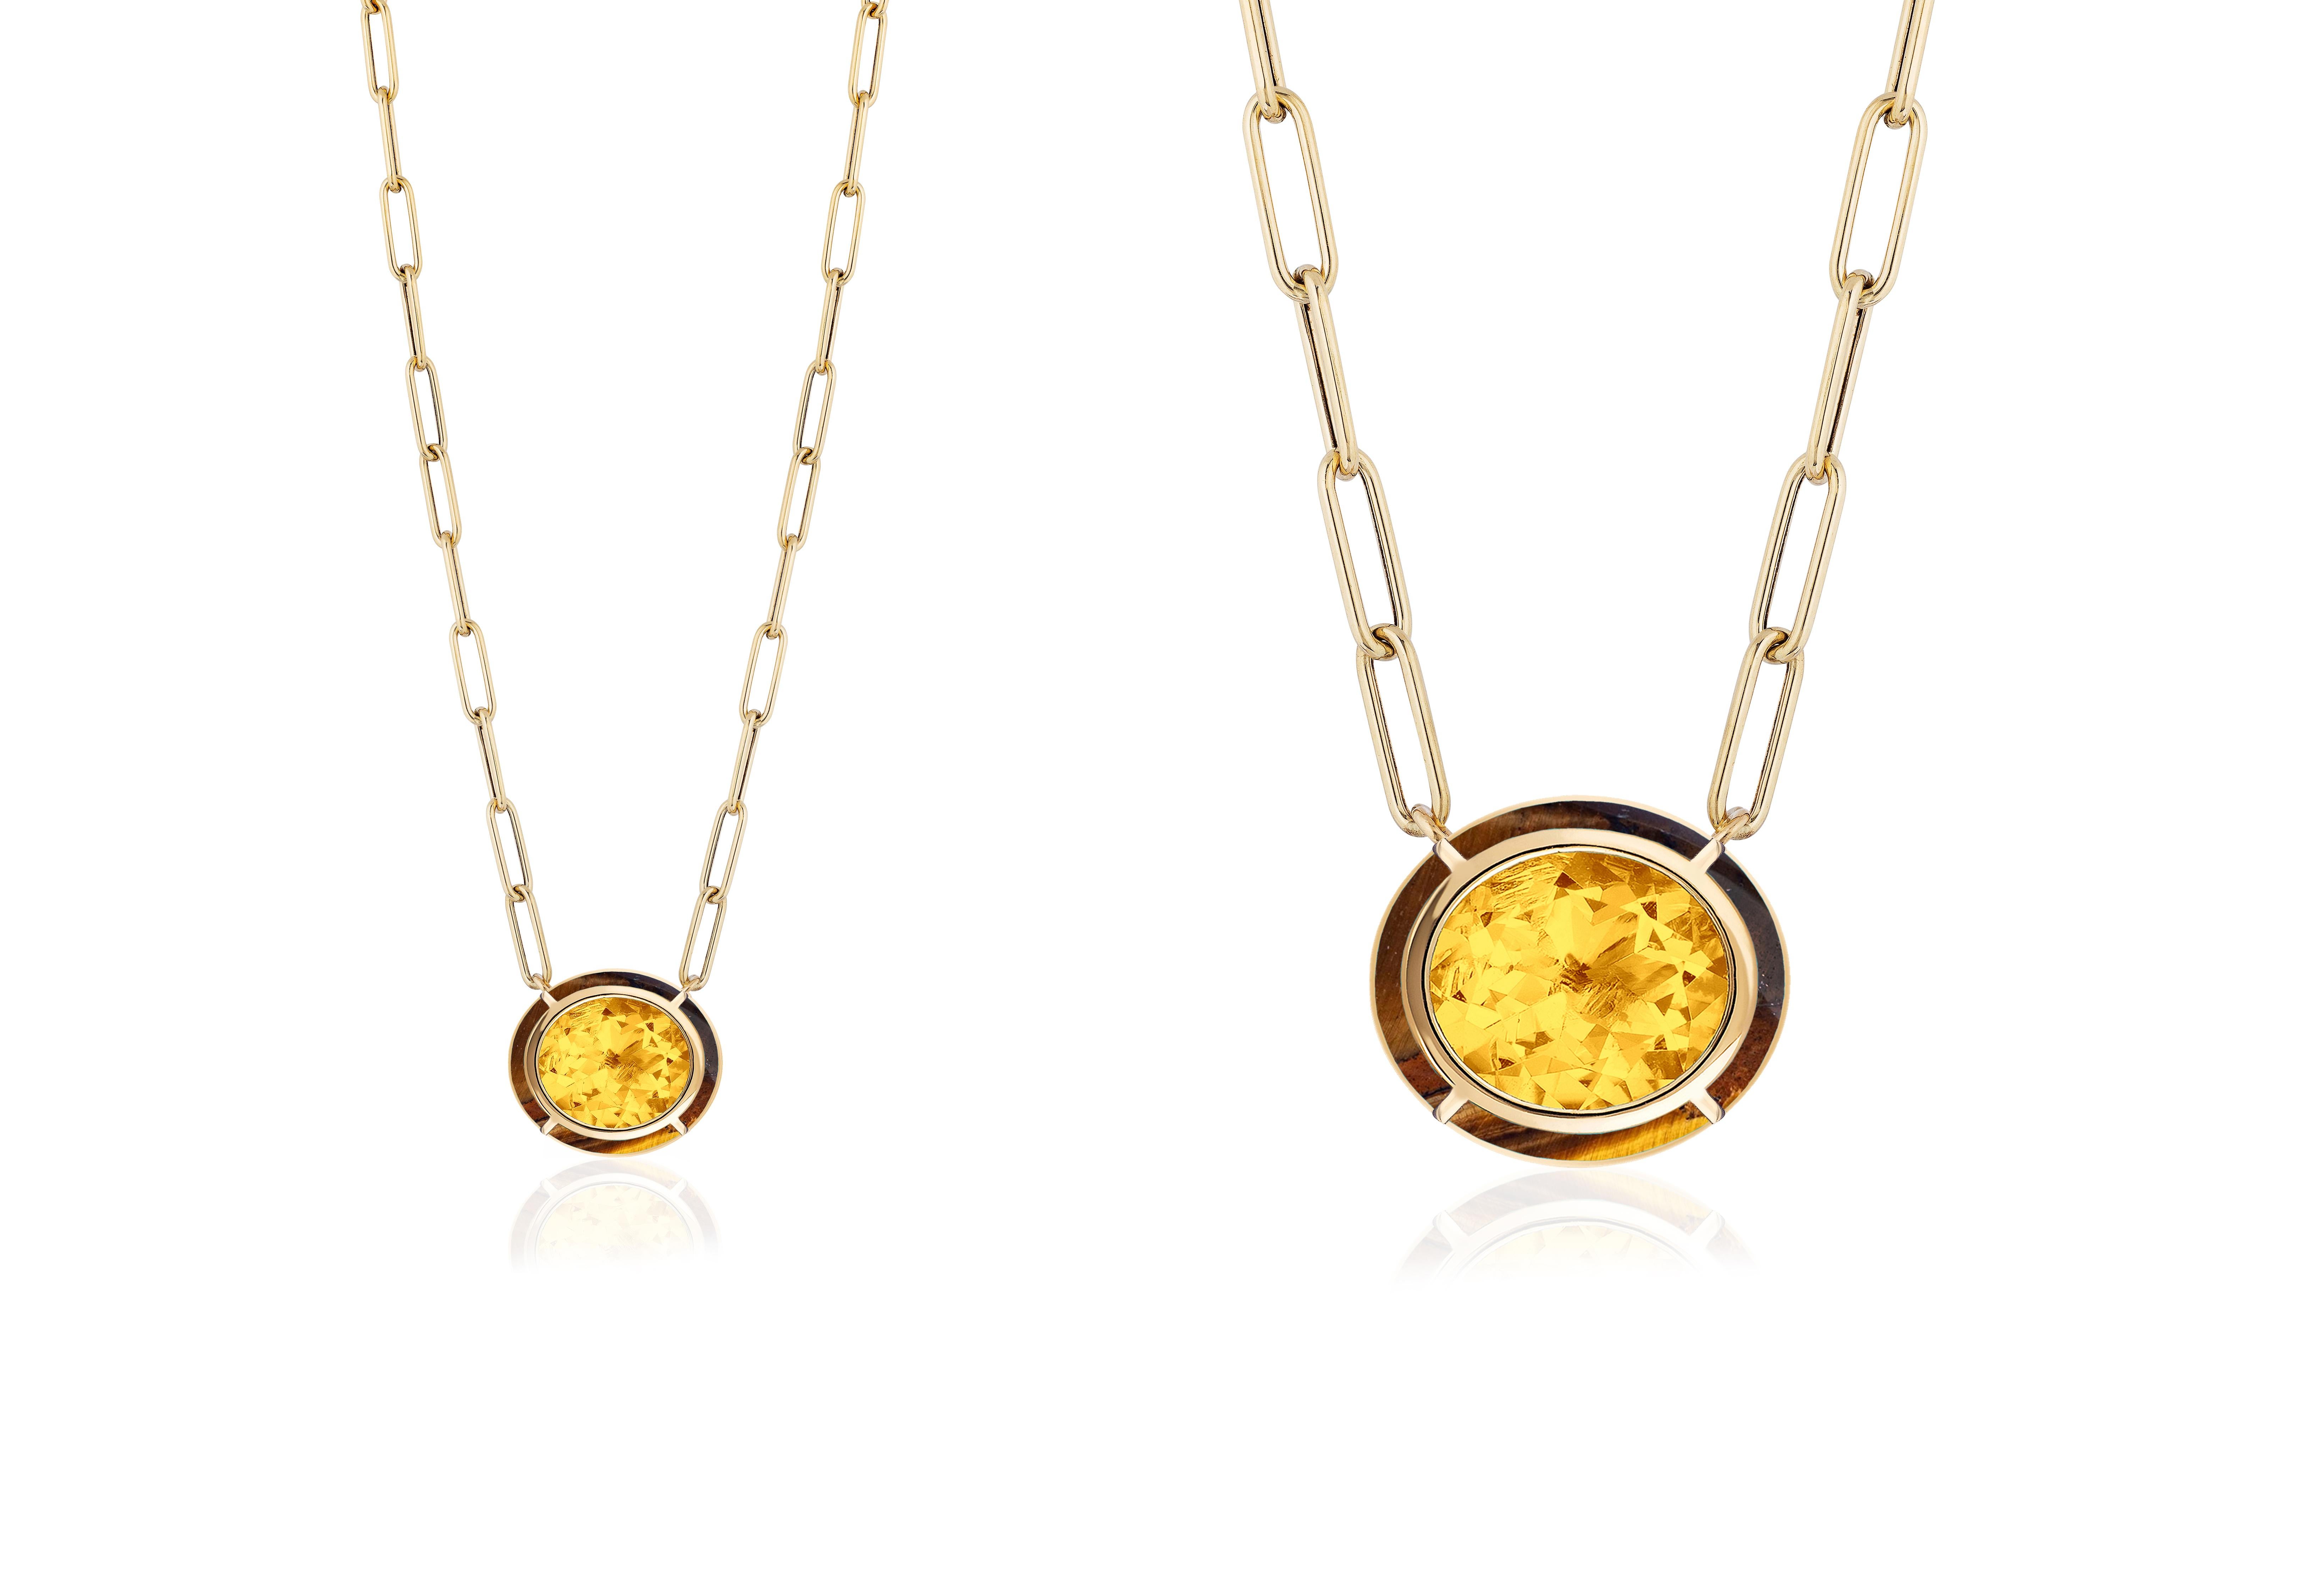 This Citrine & Tiger's Eye Inlay Oval Pendant in 18K Yellow Gold is a stunning piece of jewelry from the 'Mélange' Collection. The pendant features an oval-shaped Citrine surrounded by a Tiger's Eye stone, both set in 18K Yellow gold. The